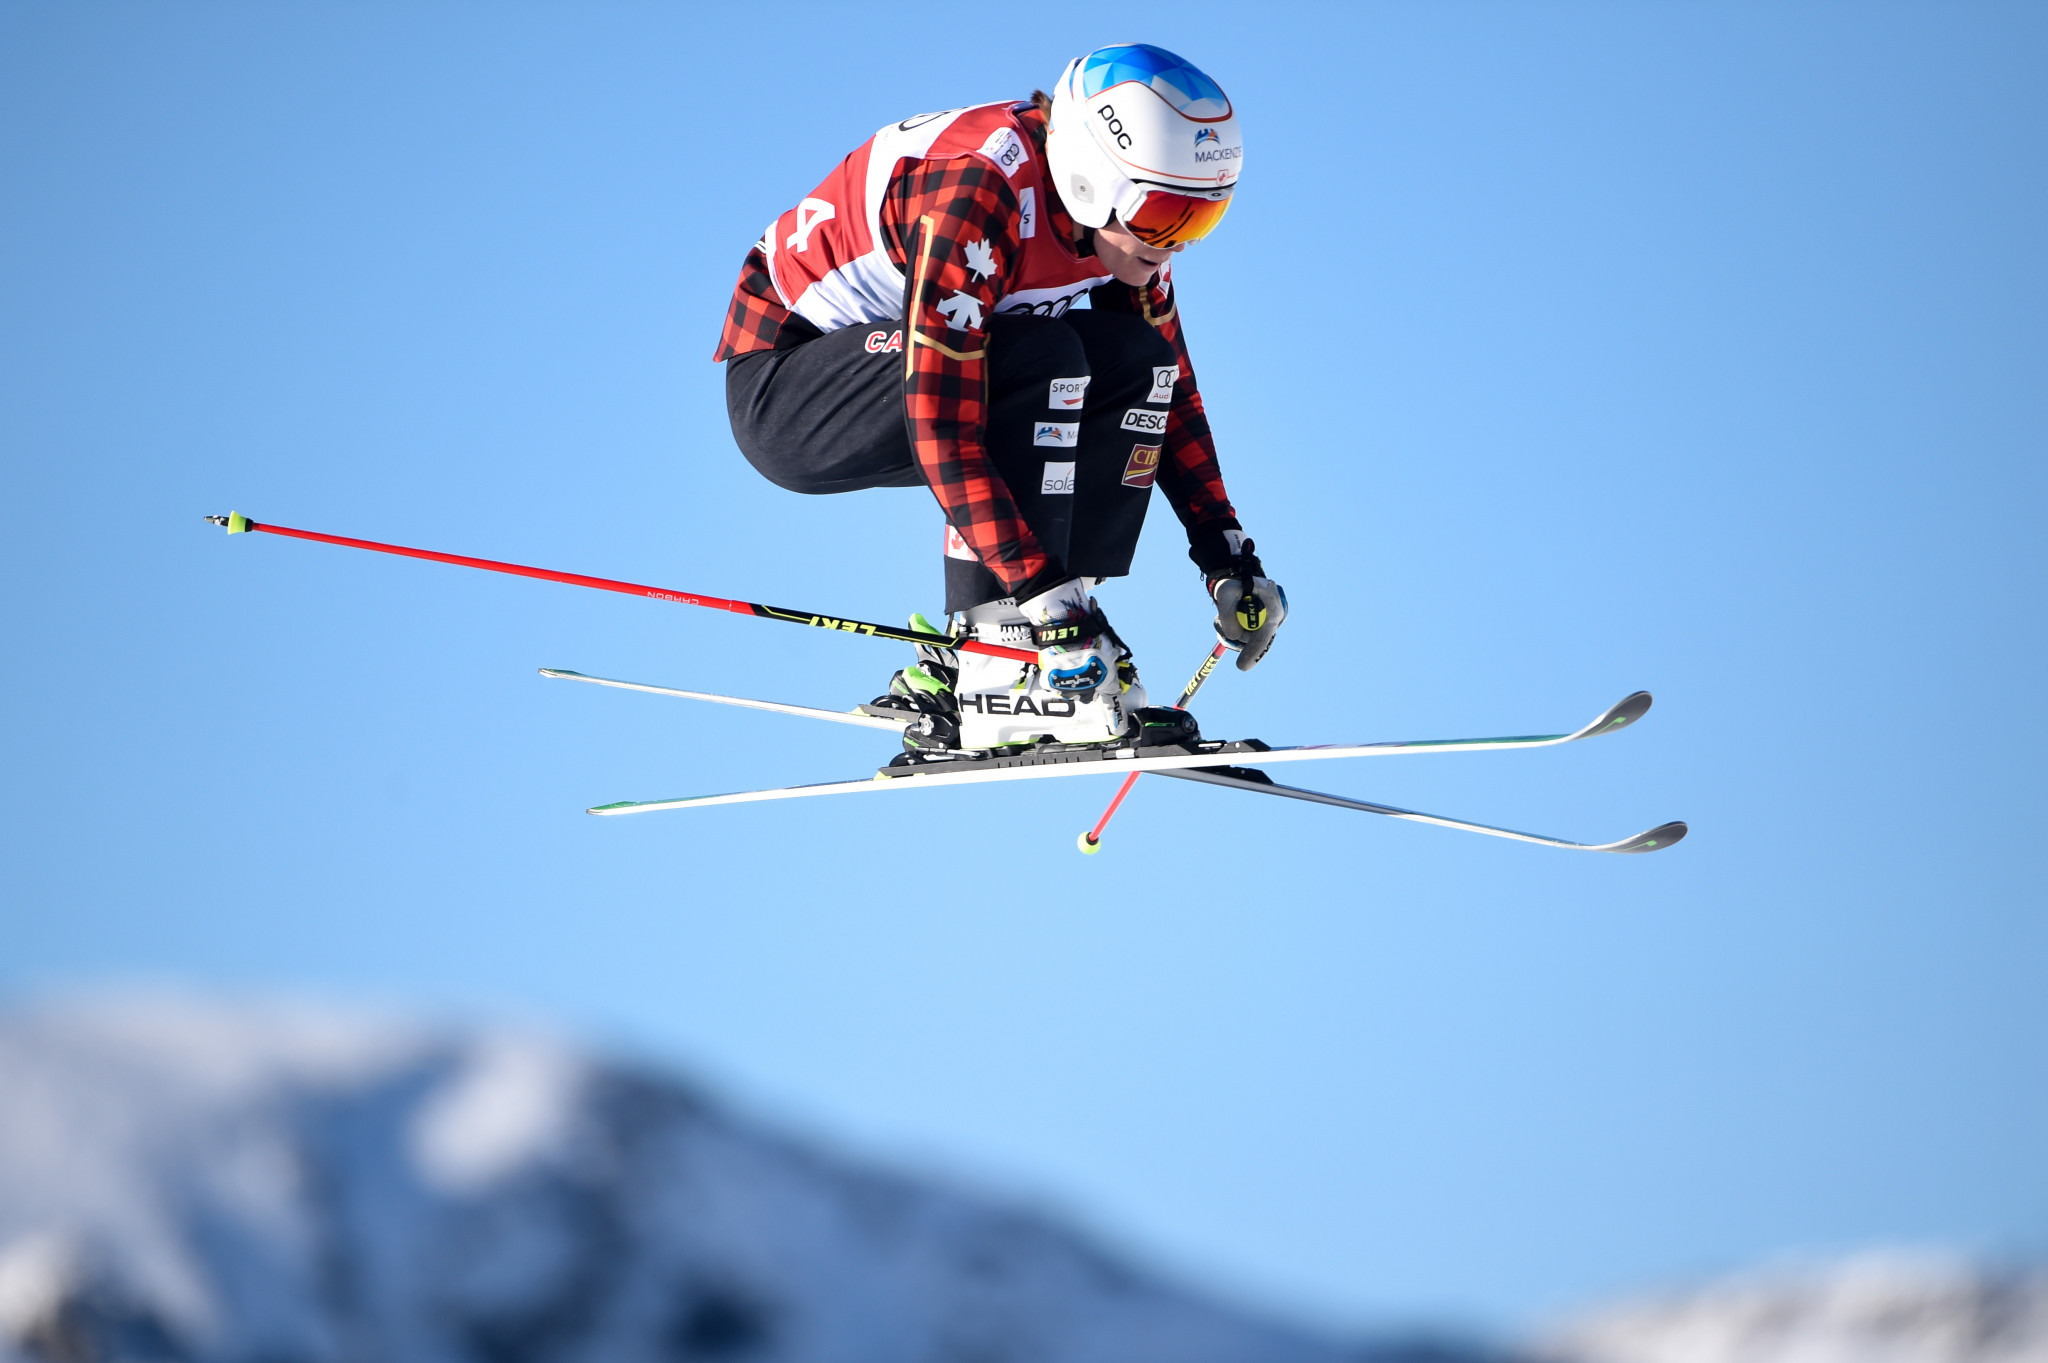 Georgia Simmerling missed the recent Pyeongchang 2018 Winter Olympics after breaking both her legs in the build-up ©Getty Images